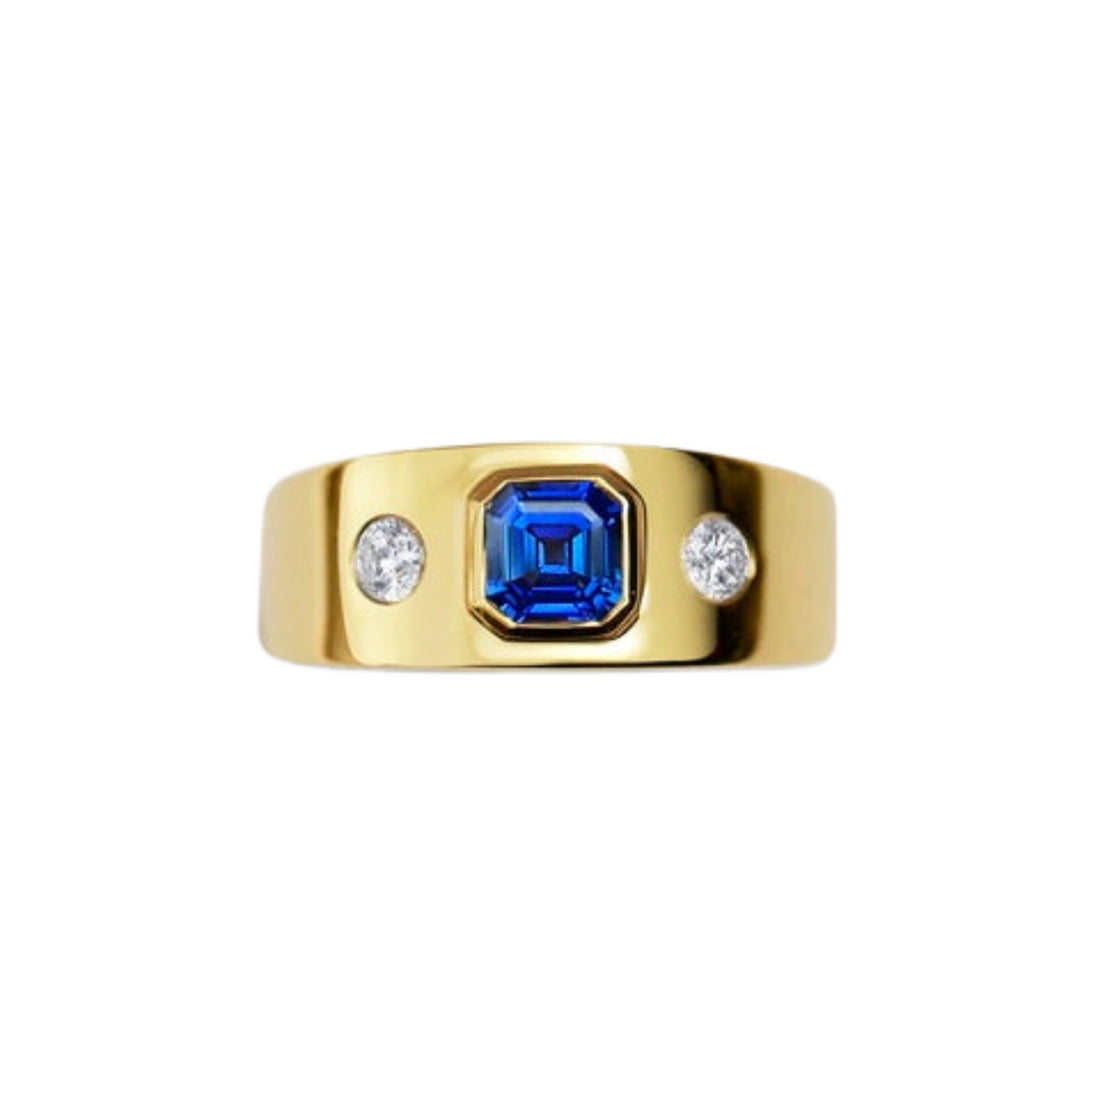  Wide band sapphire and diamond ring by Gee Woods | The Cut London